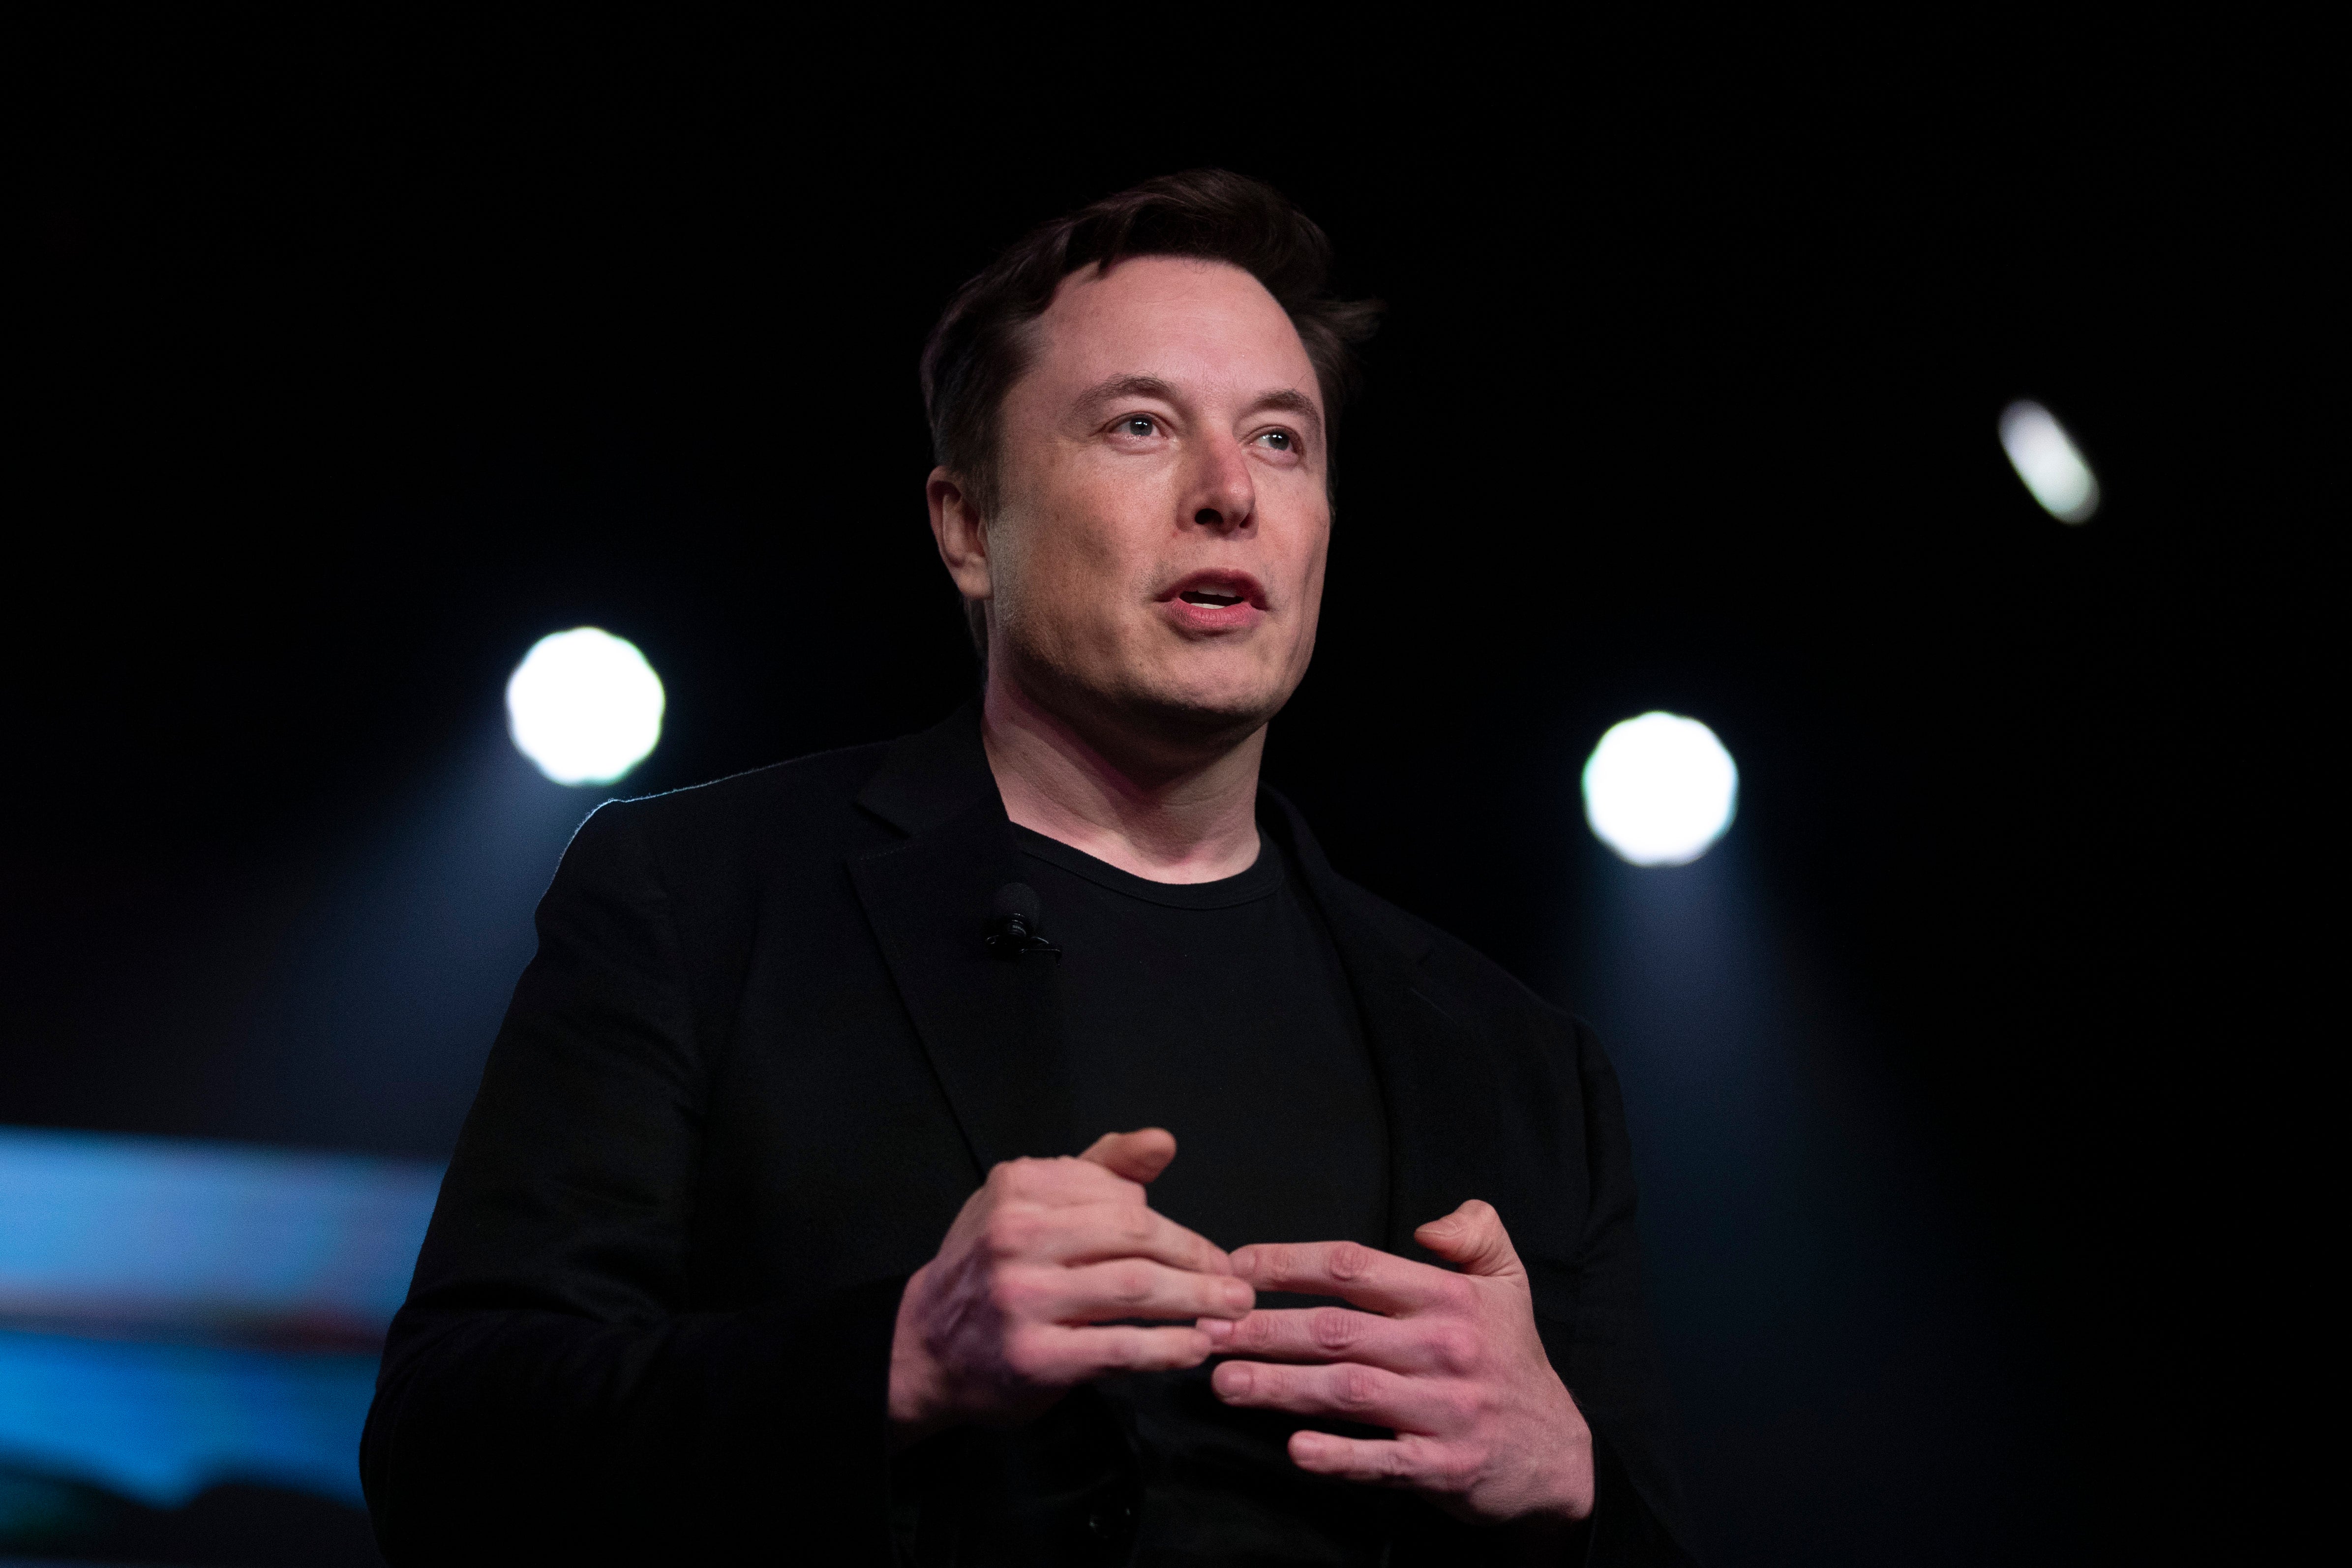 Elon Musk’s company Tesla recently passed $1 trillion in market value